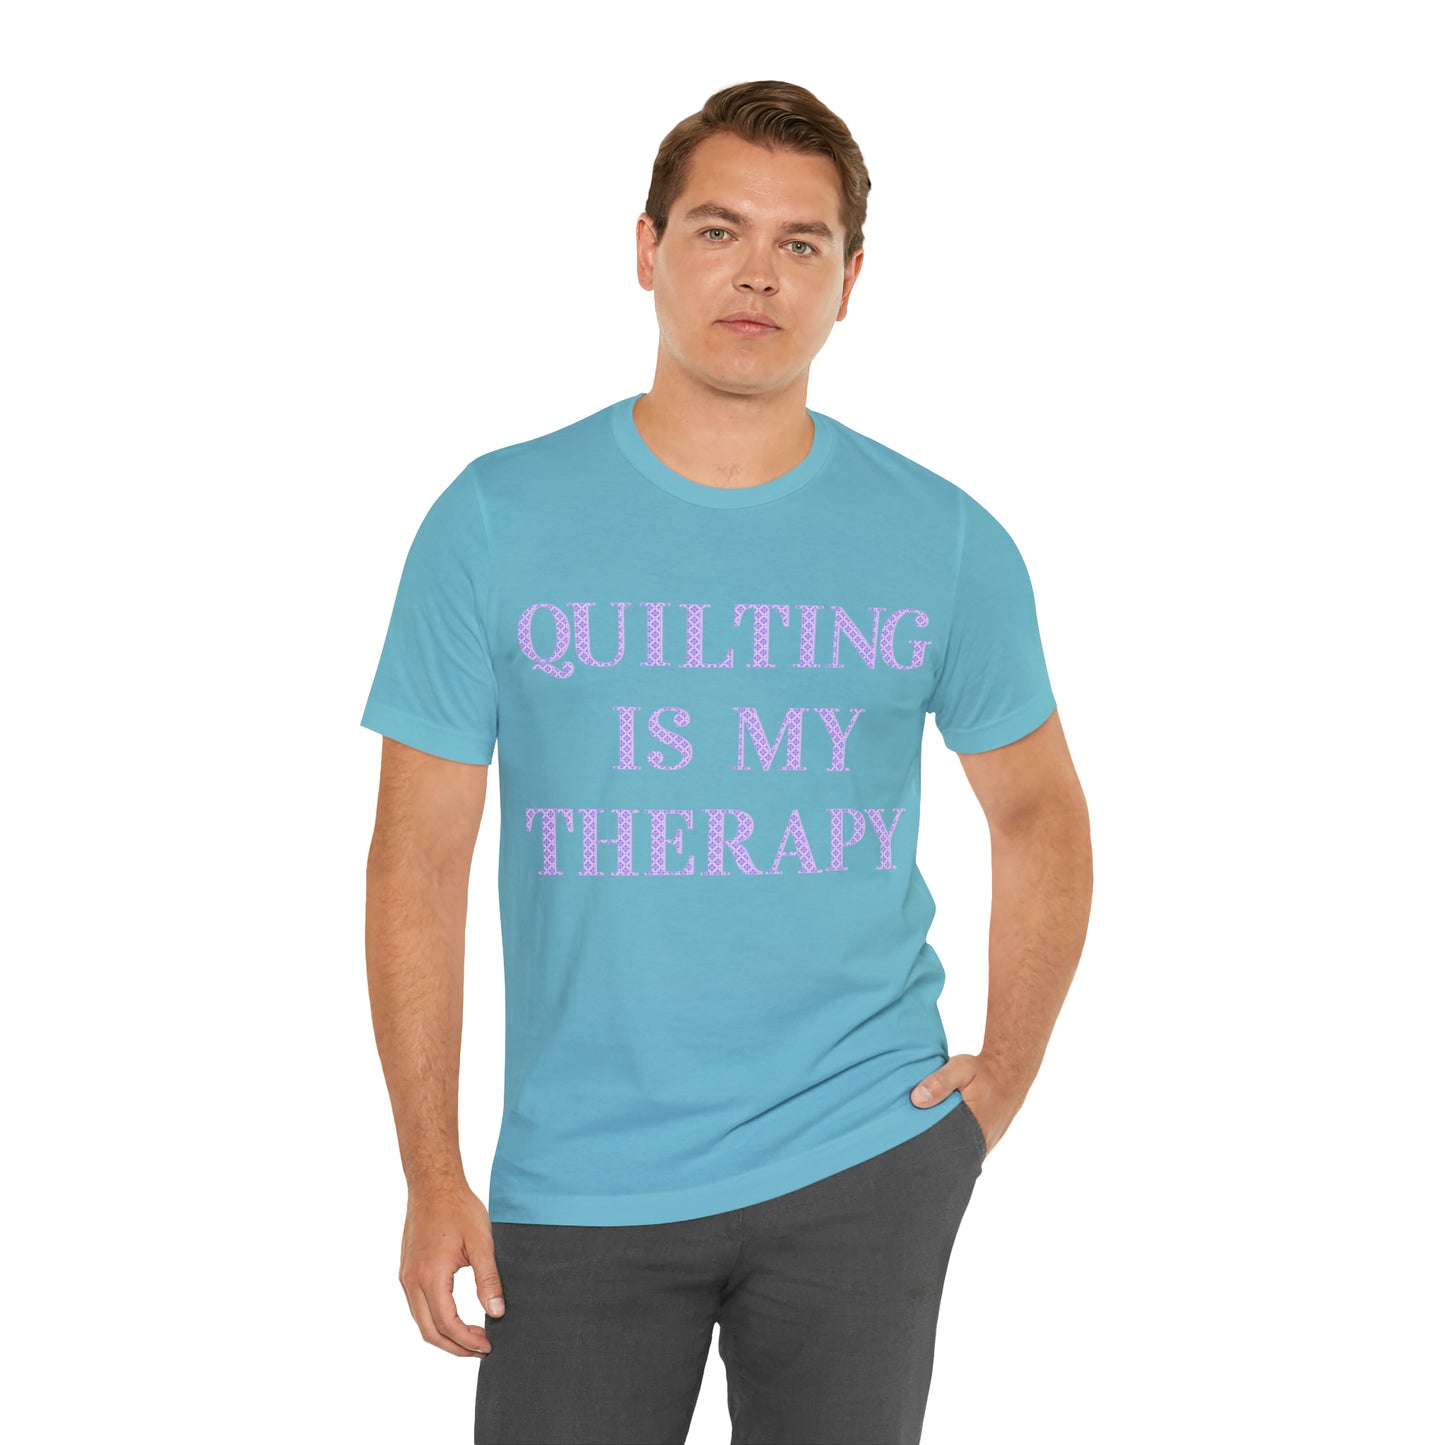 Quilting Is My Therapy- Adult, Regular Fit, Soft Cotton, Full Size Image, T-shirt